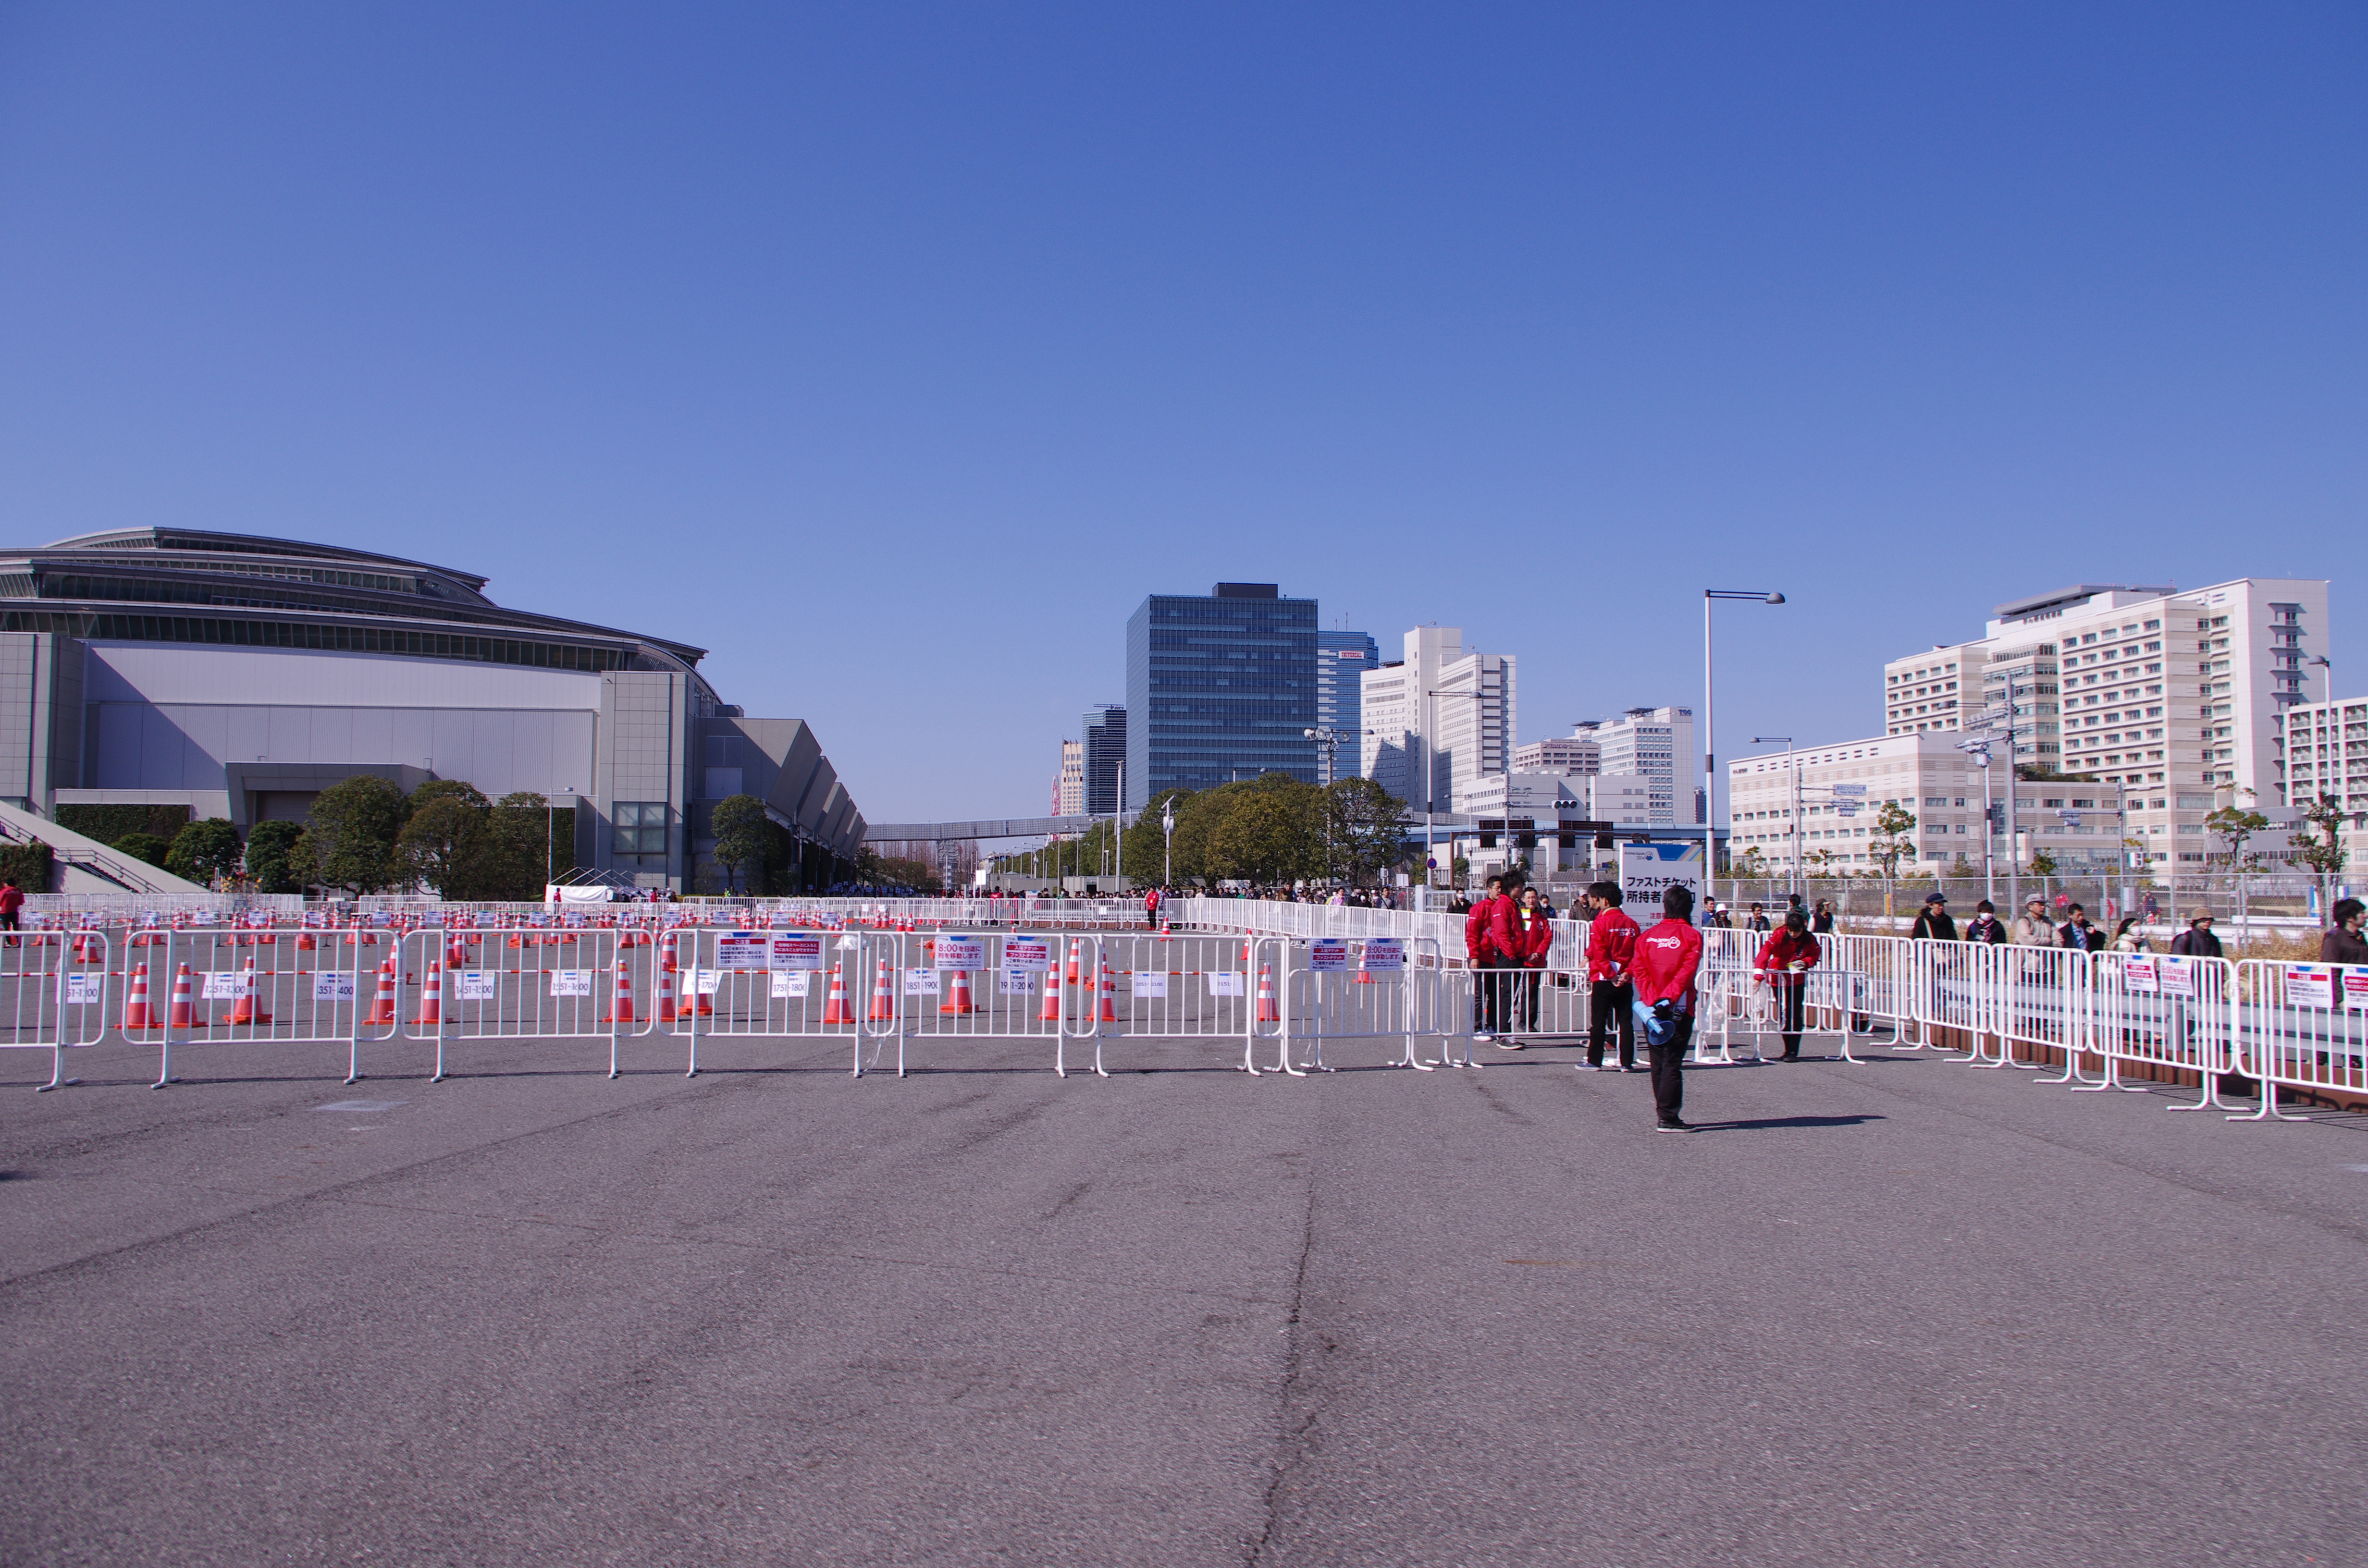 All of these were prepared for long lines of anime fans before the Anime Japan 2014 event